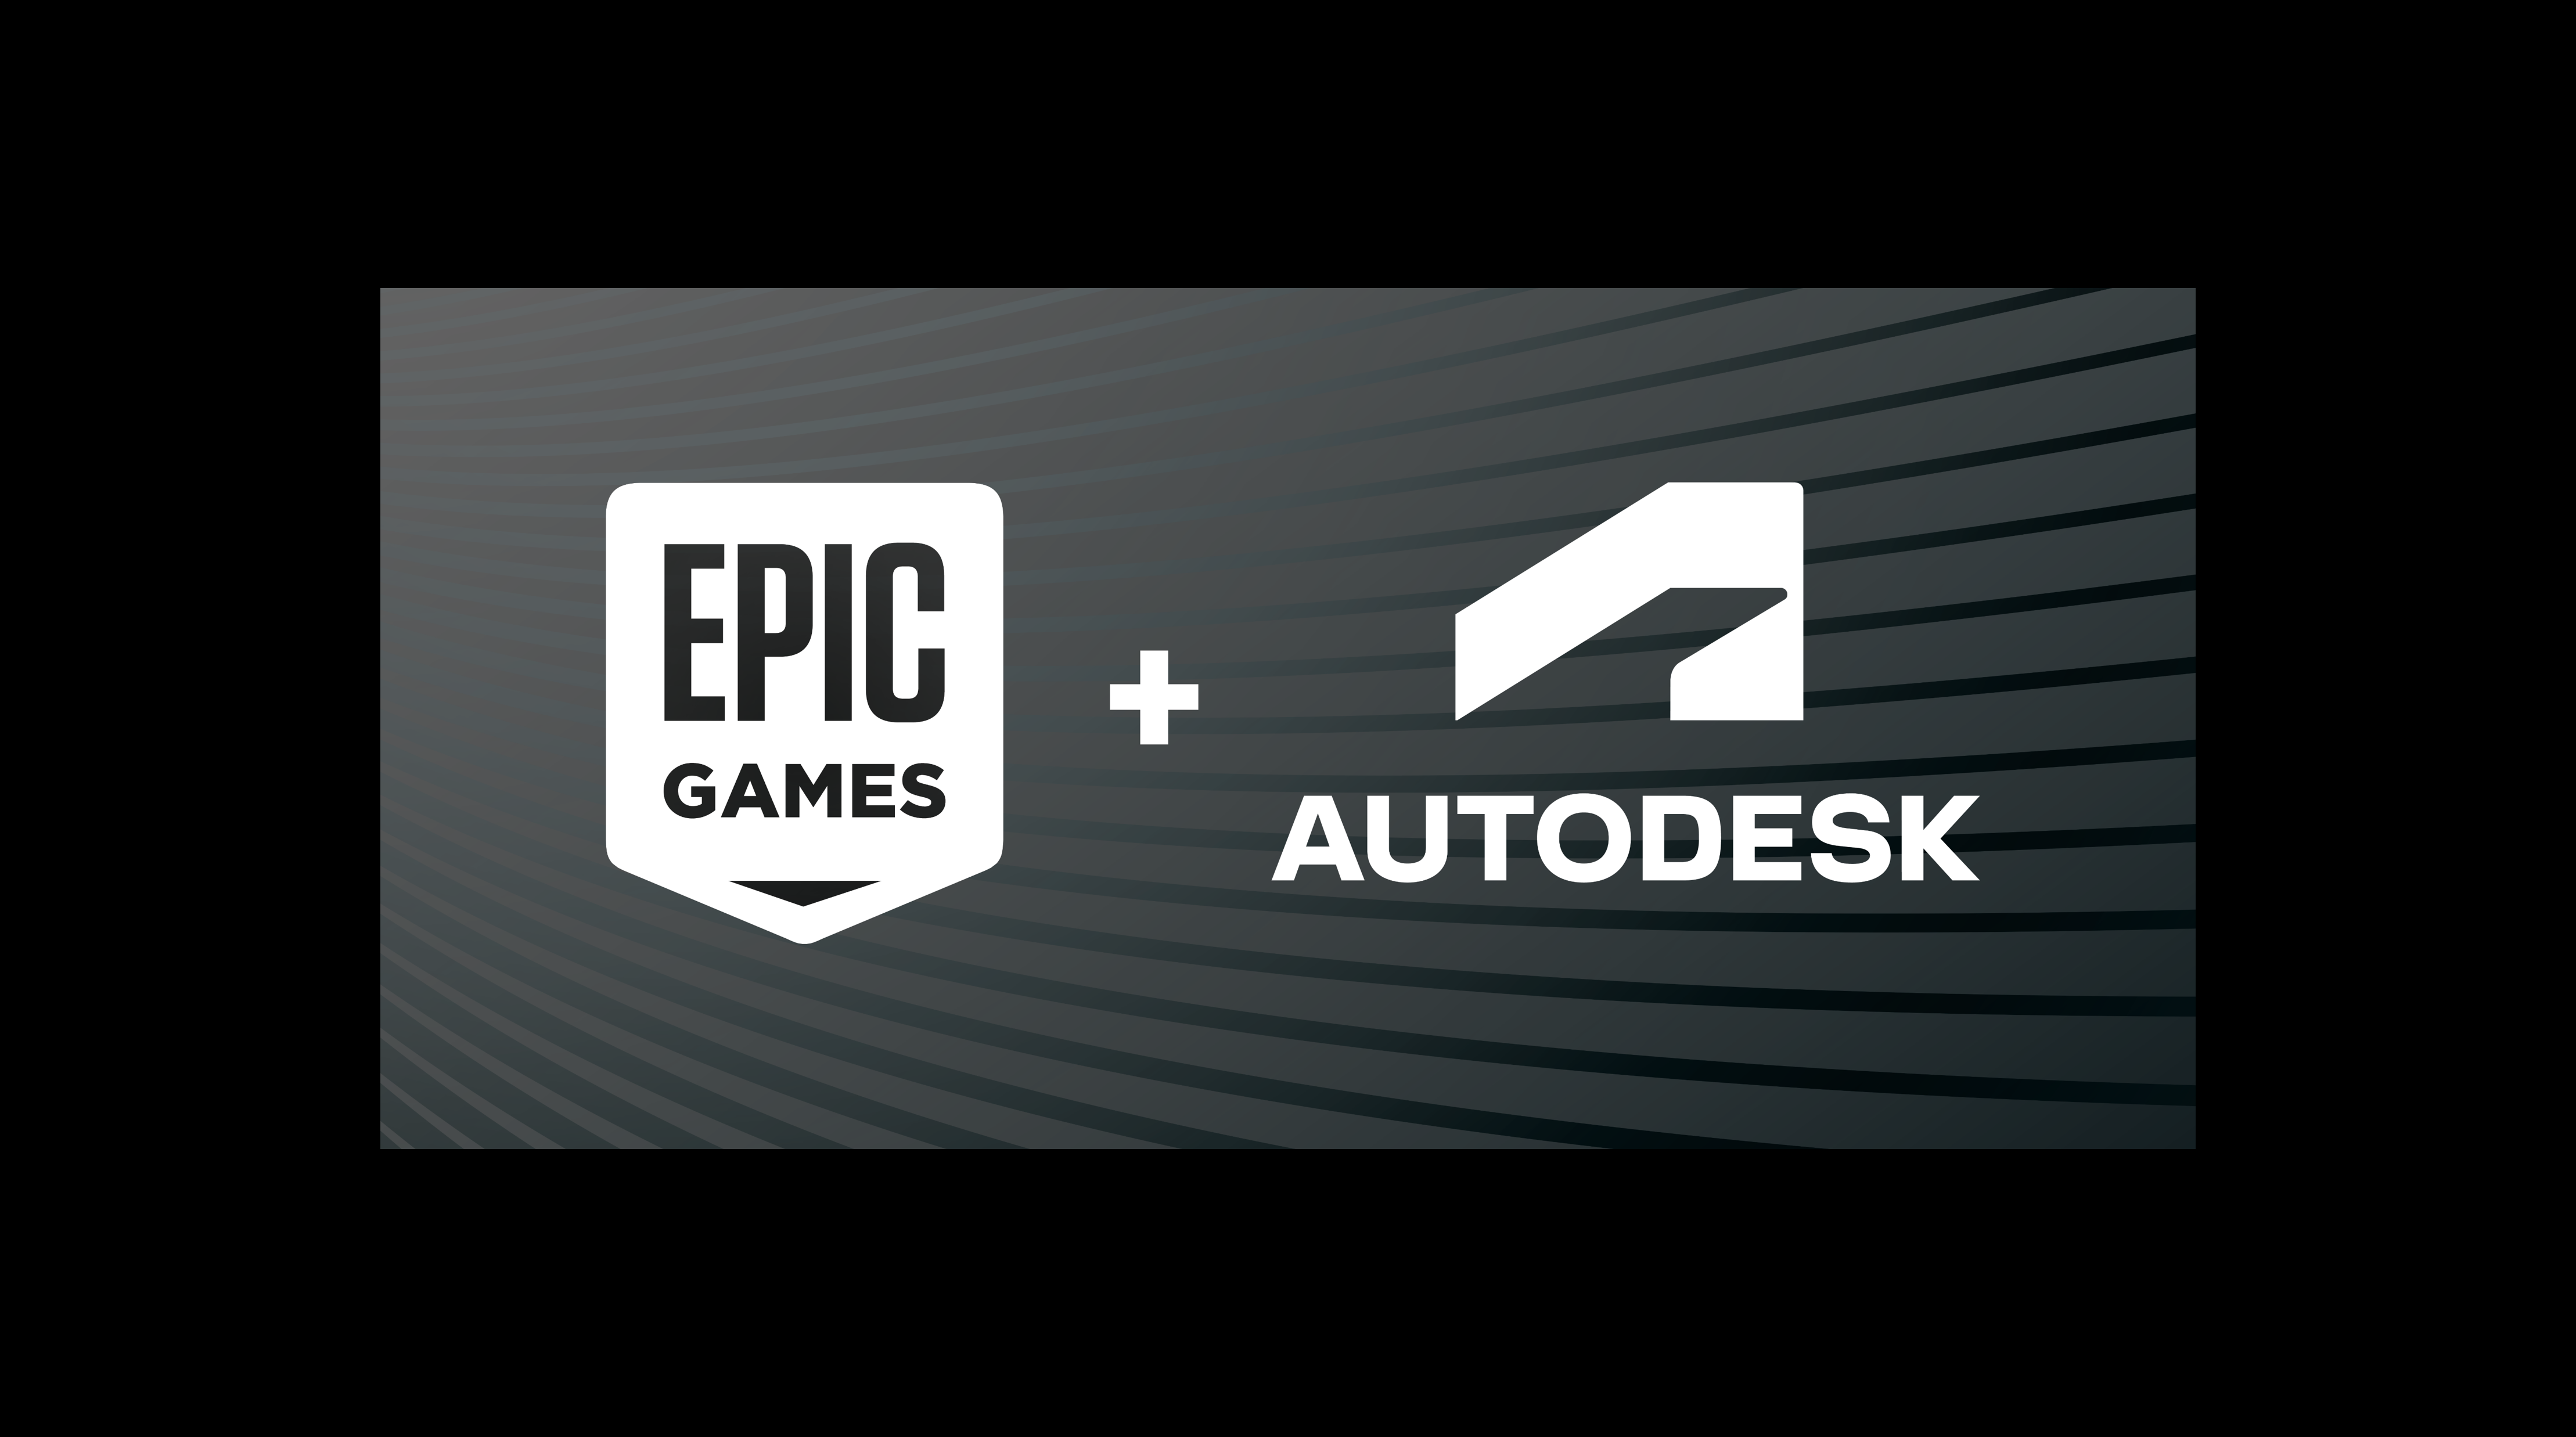 Autodesk and Epic Games collaborate for AEC